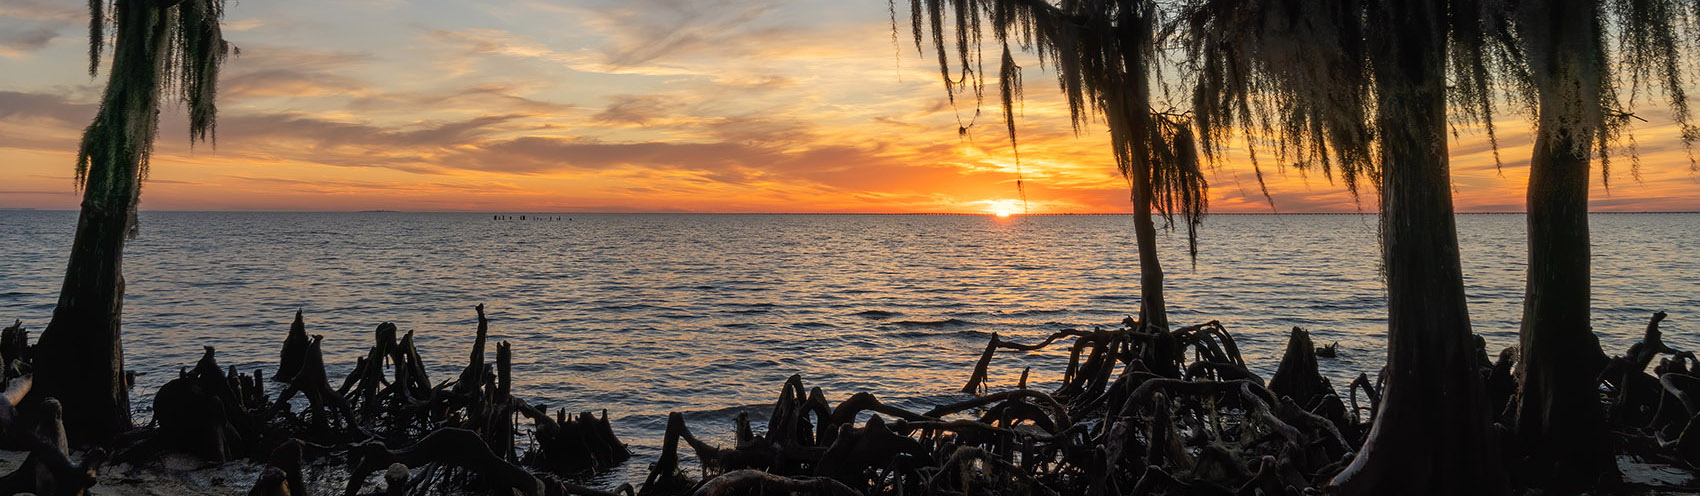 sunset over lake pontchartrain in Foutainbleau State Park with moss-covered cypress trees and bare roots along shoreline